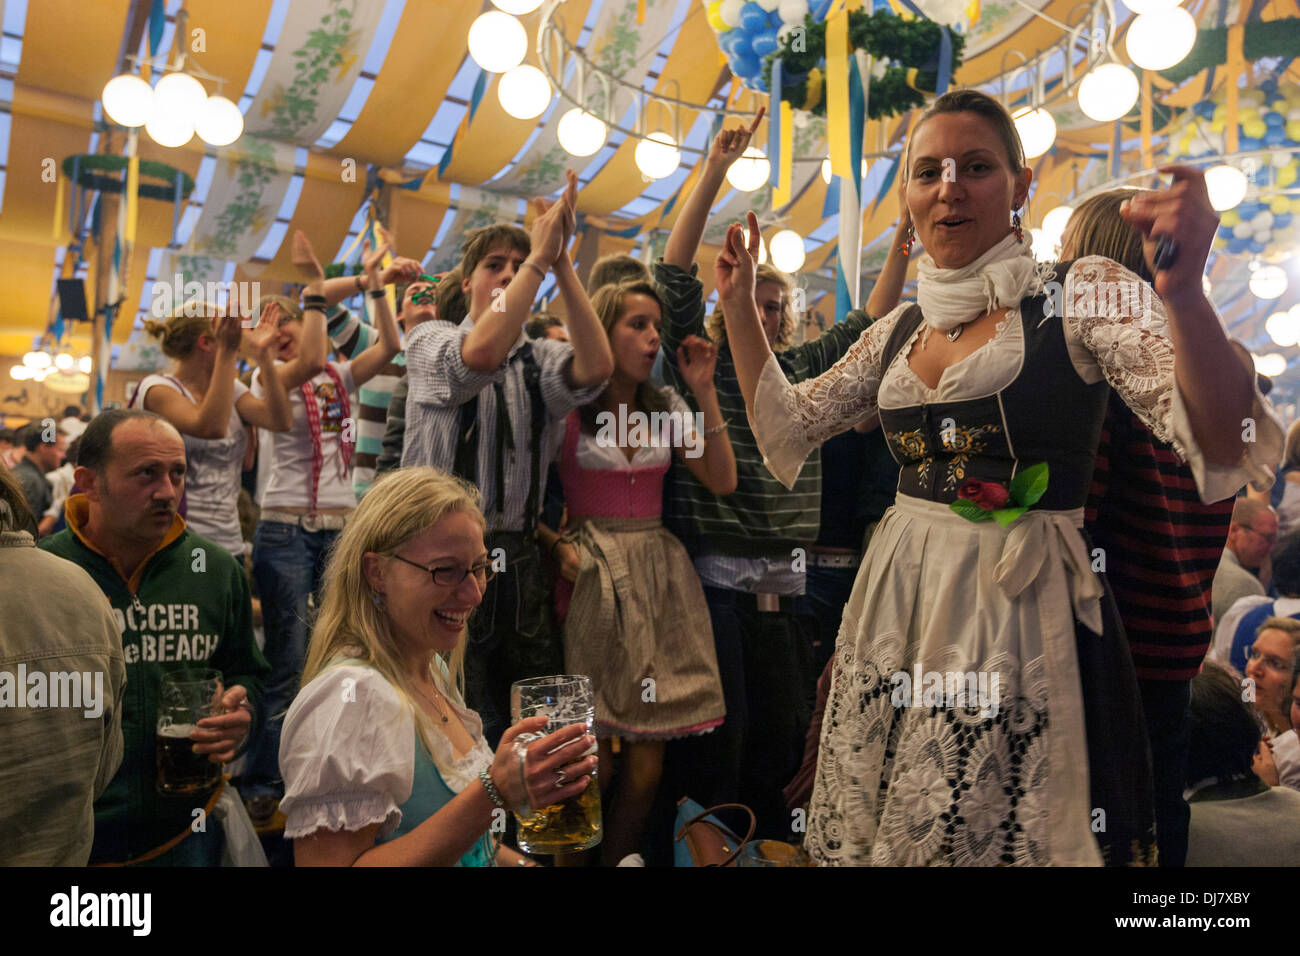 Girl Dancing On The Table In The Oktoberfest The World S Largest Beer